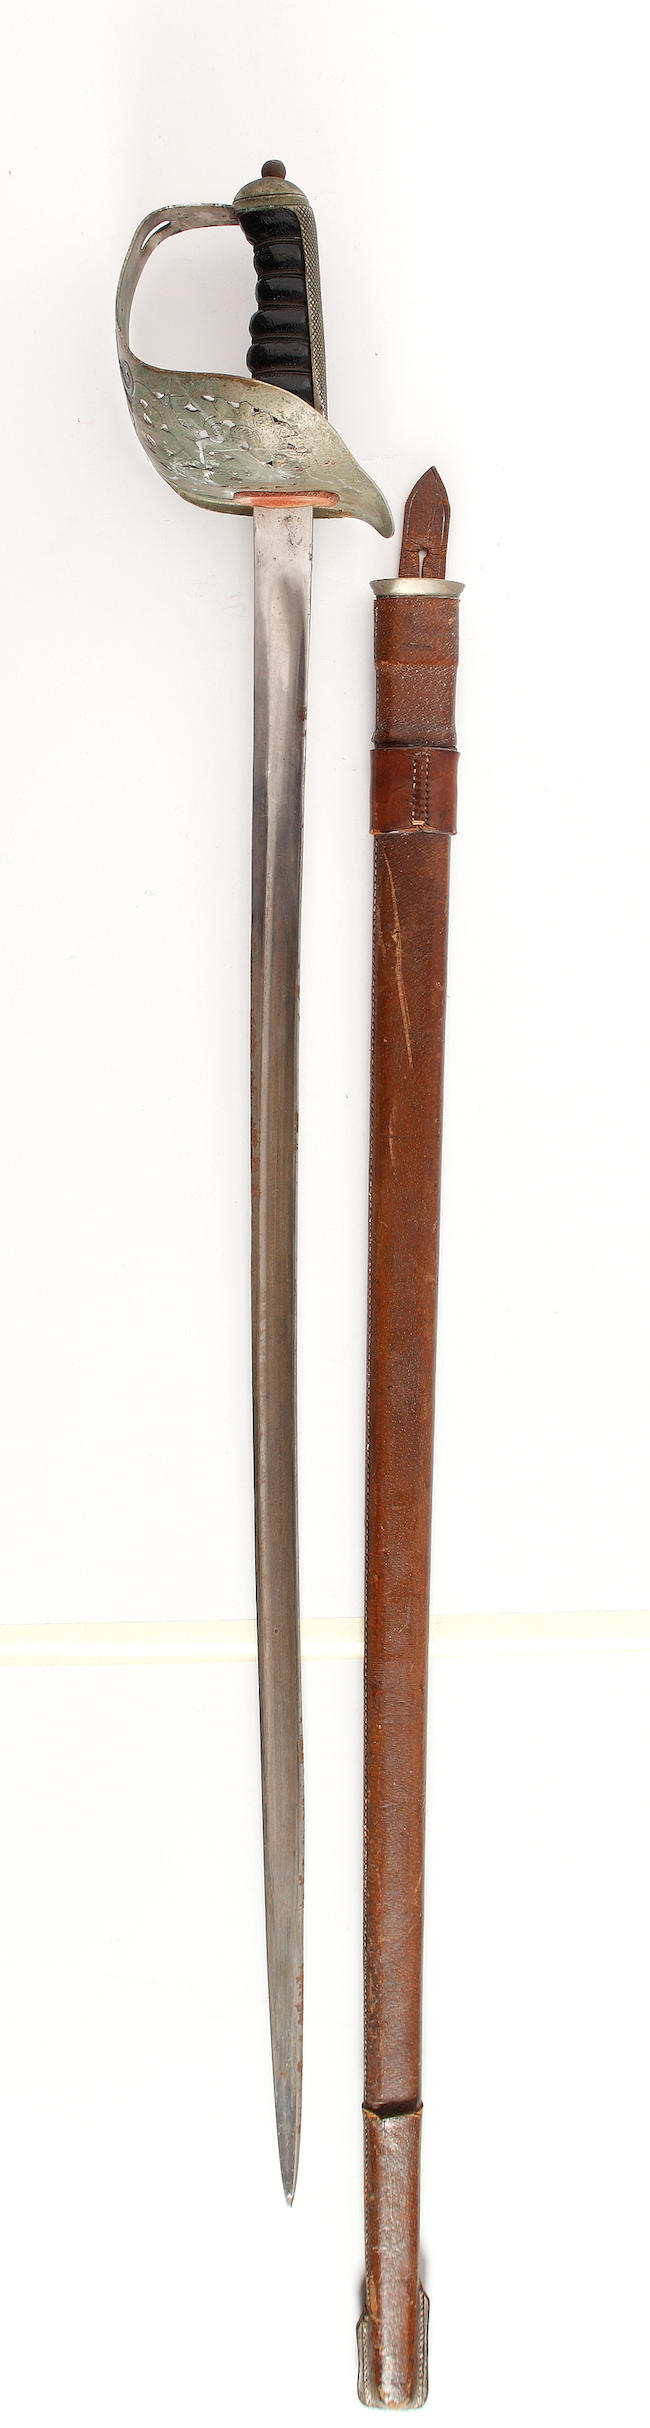 A Rifle Officer's Levee Sword